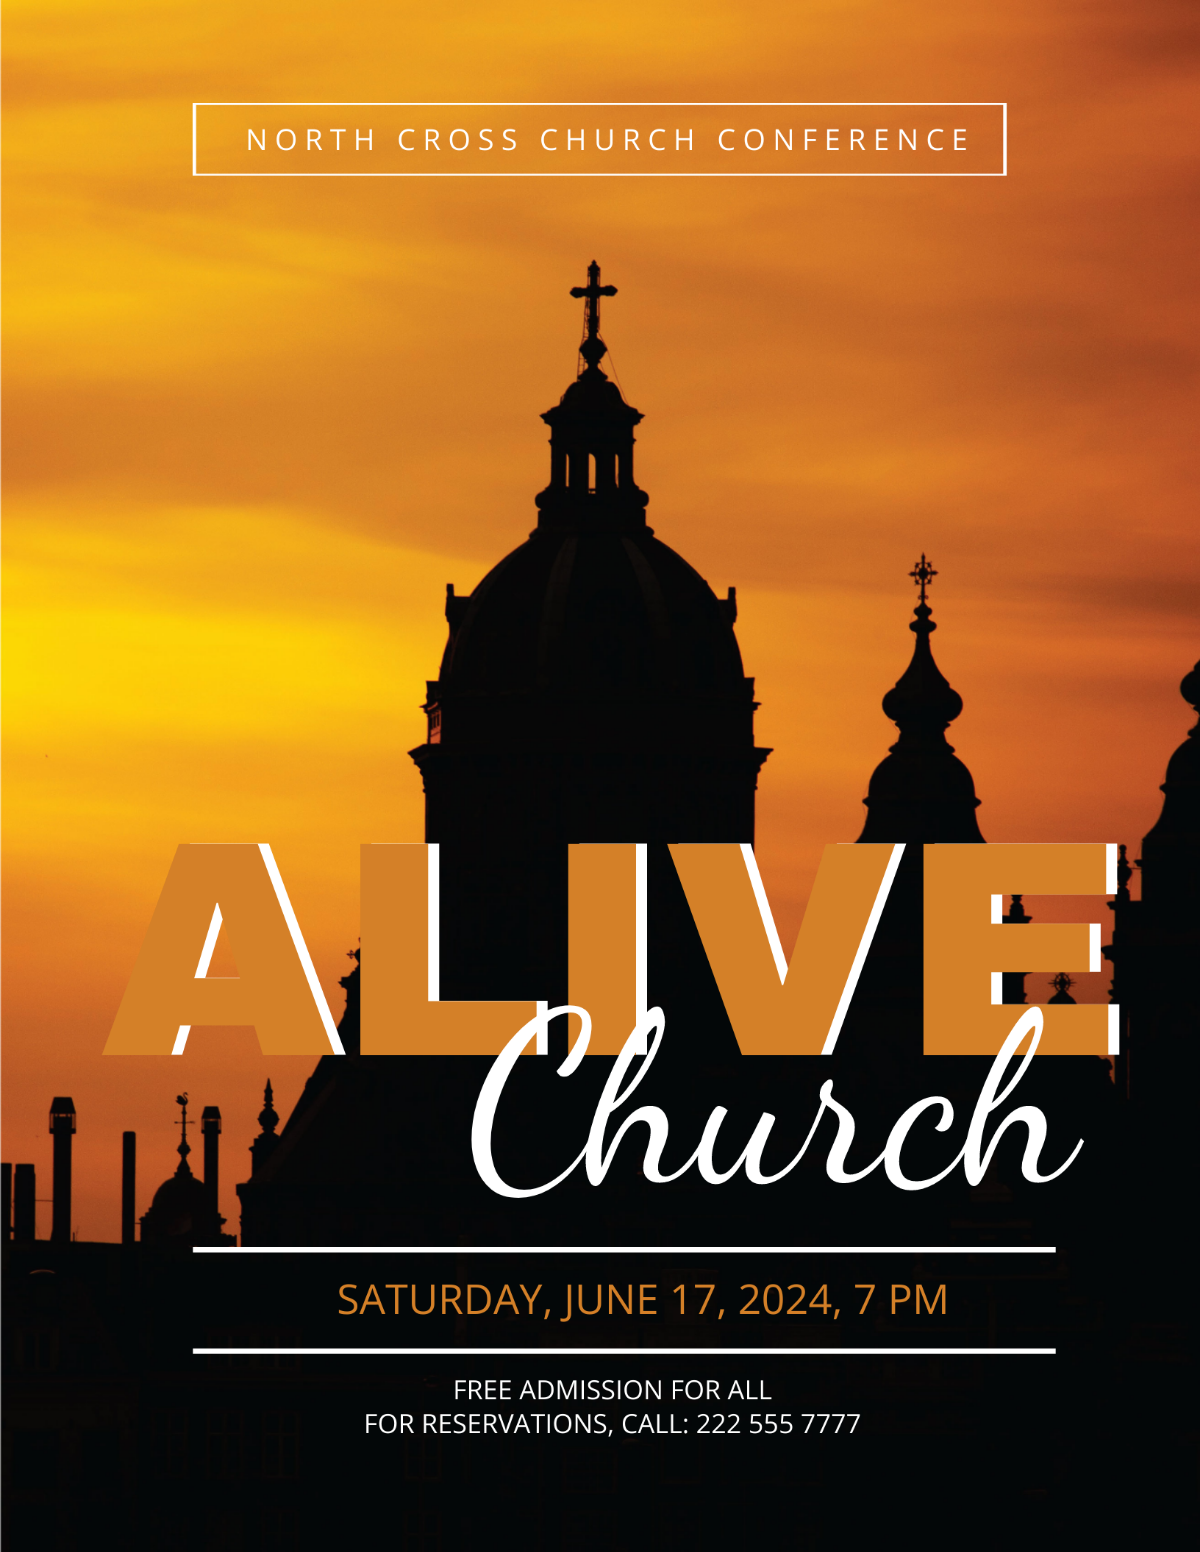 Alive Church Conference Flyer Template